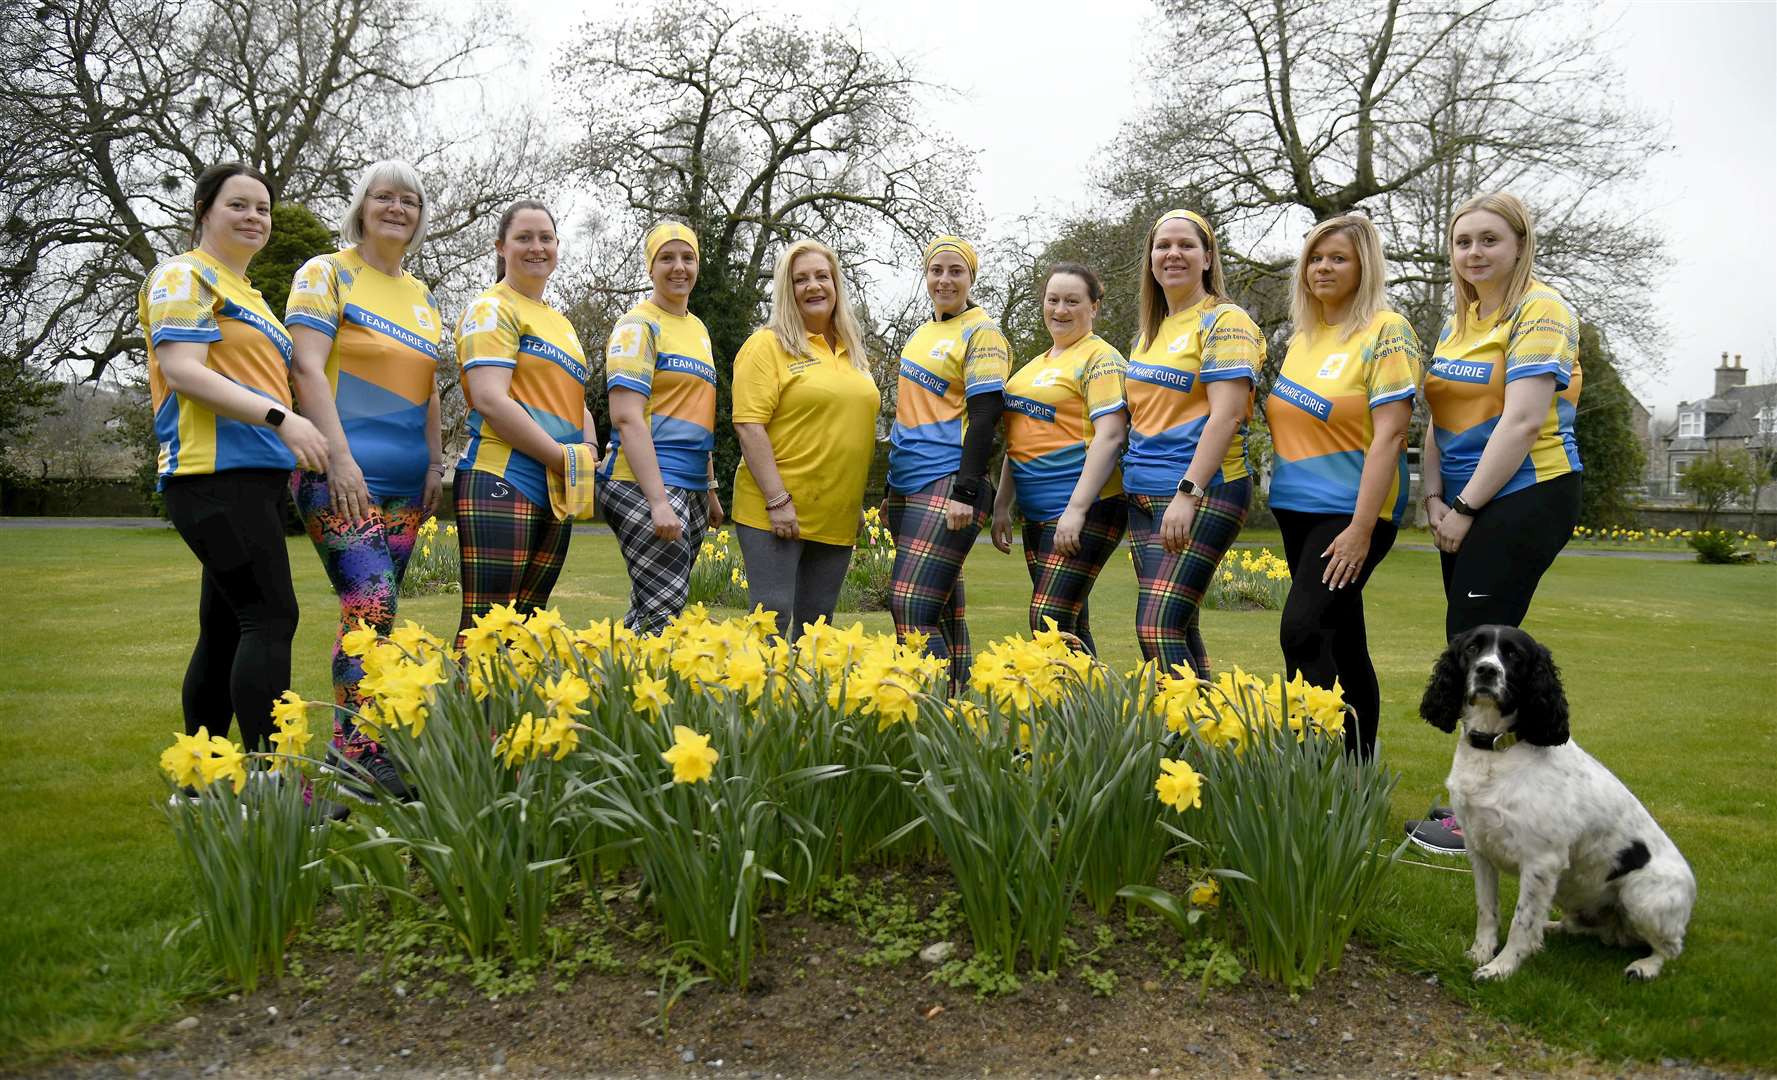 Aberdeen Kiltwalk walkers from the Huntly Marie Curie group are, from theleft Lauren Petrie, Jackie Milne, Gwyneth Petrie, Wendy Taylor, Alisanne Ennis, Catherine Fry, Emma McGee, Debbie Morrison, Morag Smith, Sophie Gunn and dog Milo. Picture: Becky Saunderson.